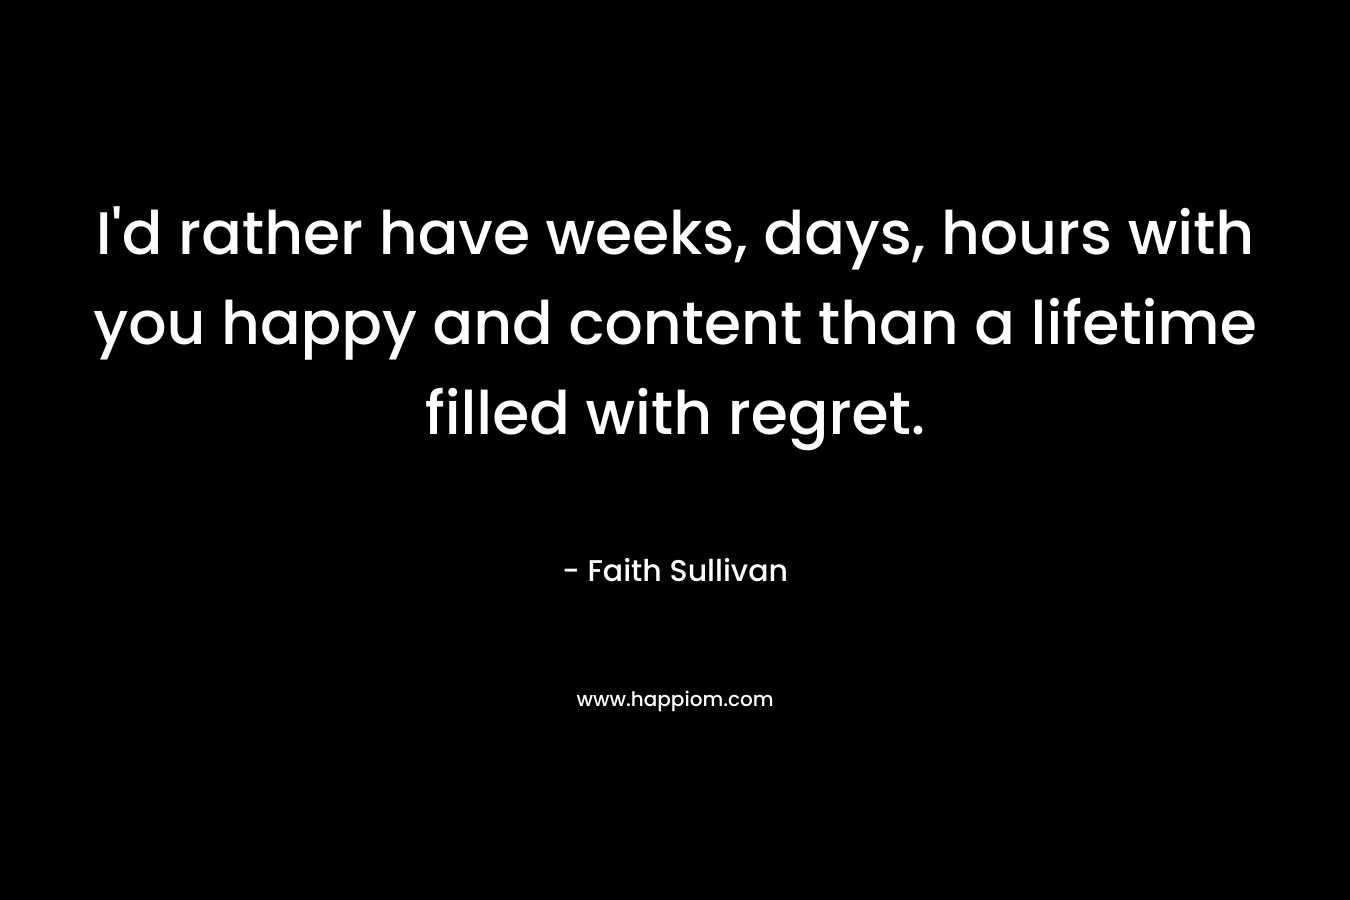 I'd rather have weeks, days, hours with you happy and content than a lifetime filled with regret.